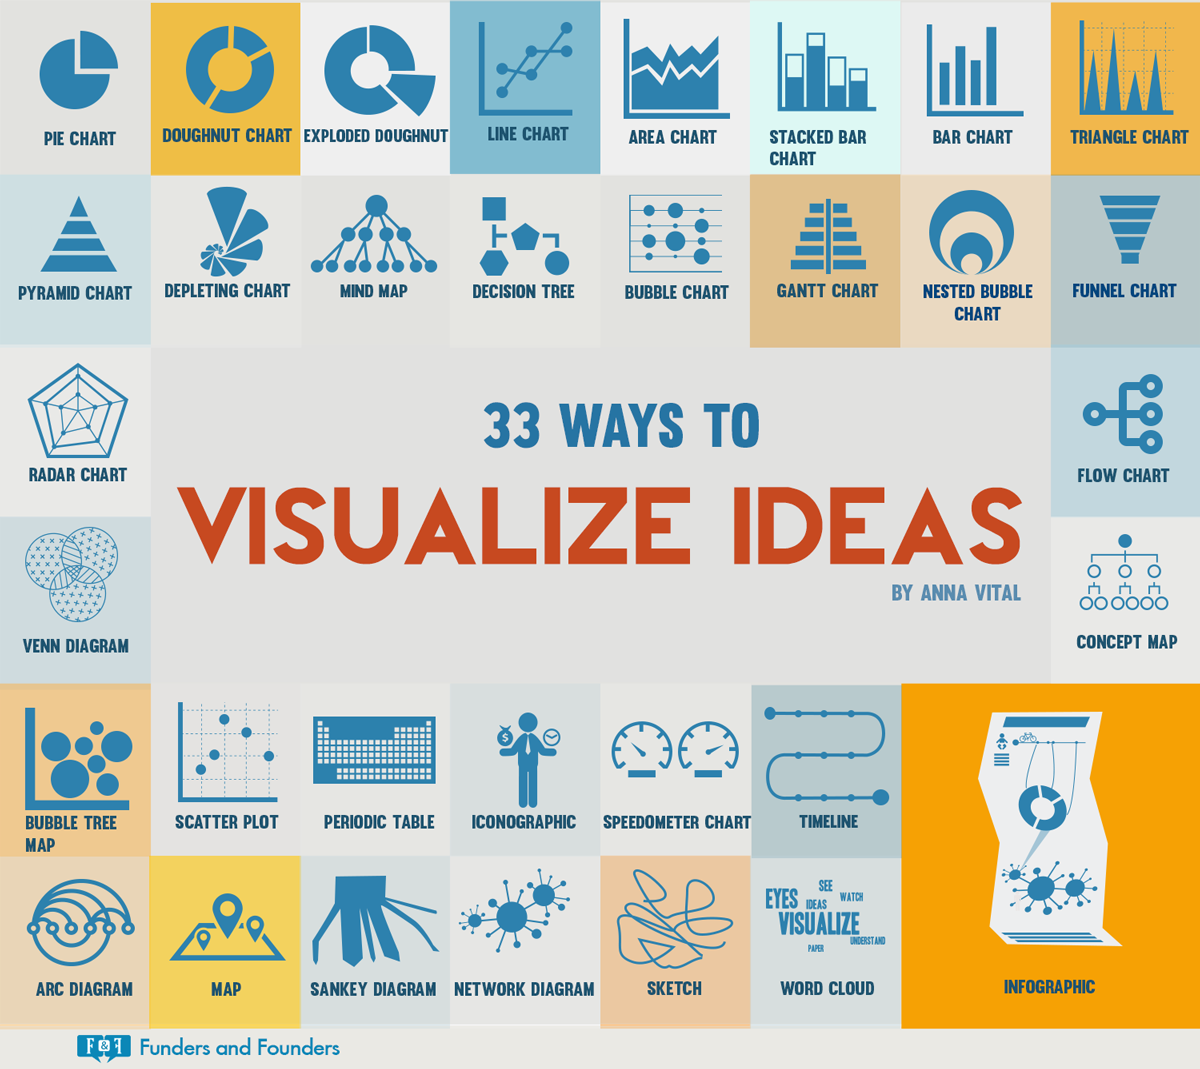 33 Ways to Visualize IdeasChoose among different charts, diagrams, and visual techniques to visualize your ideas. If you can see it, you can do it.